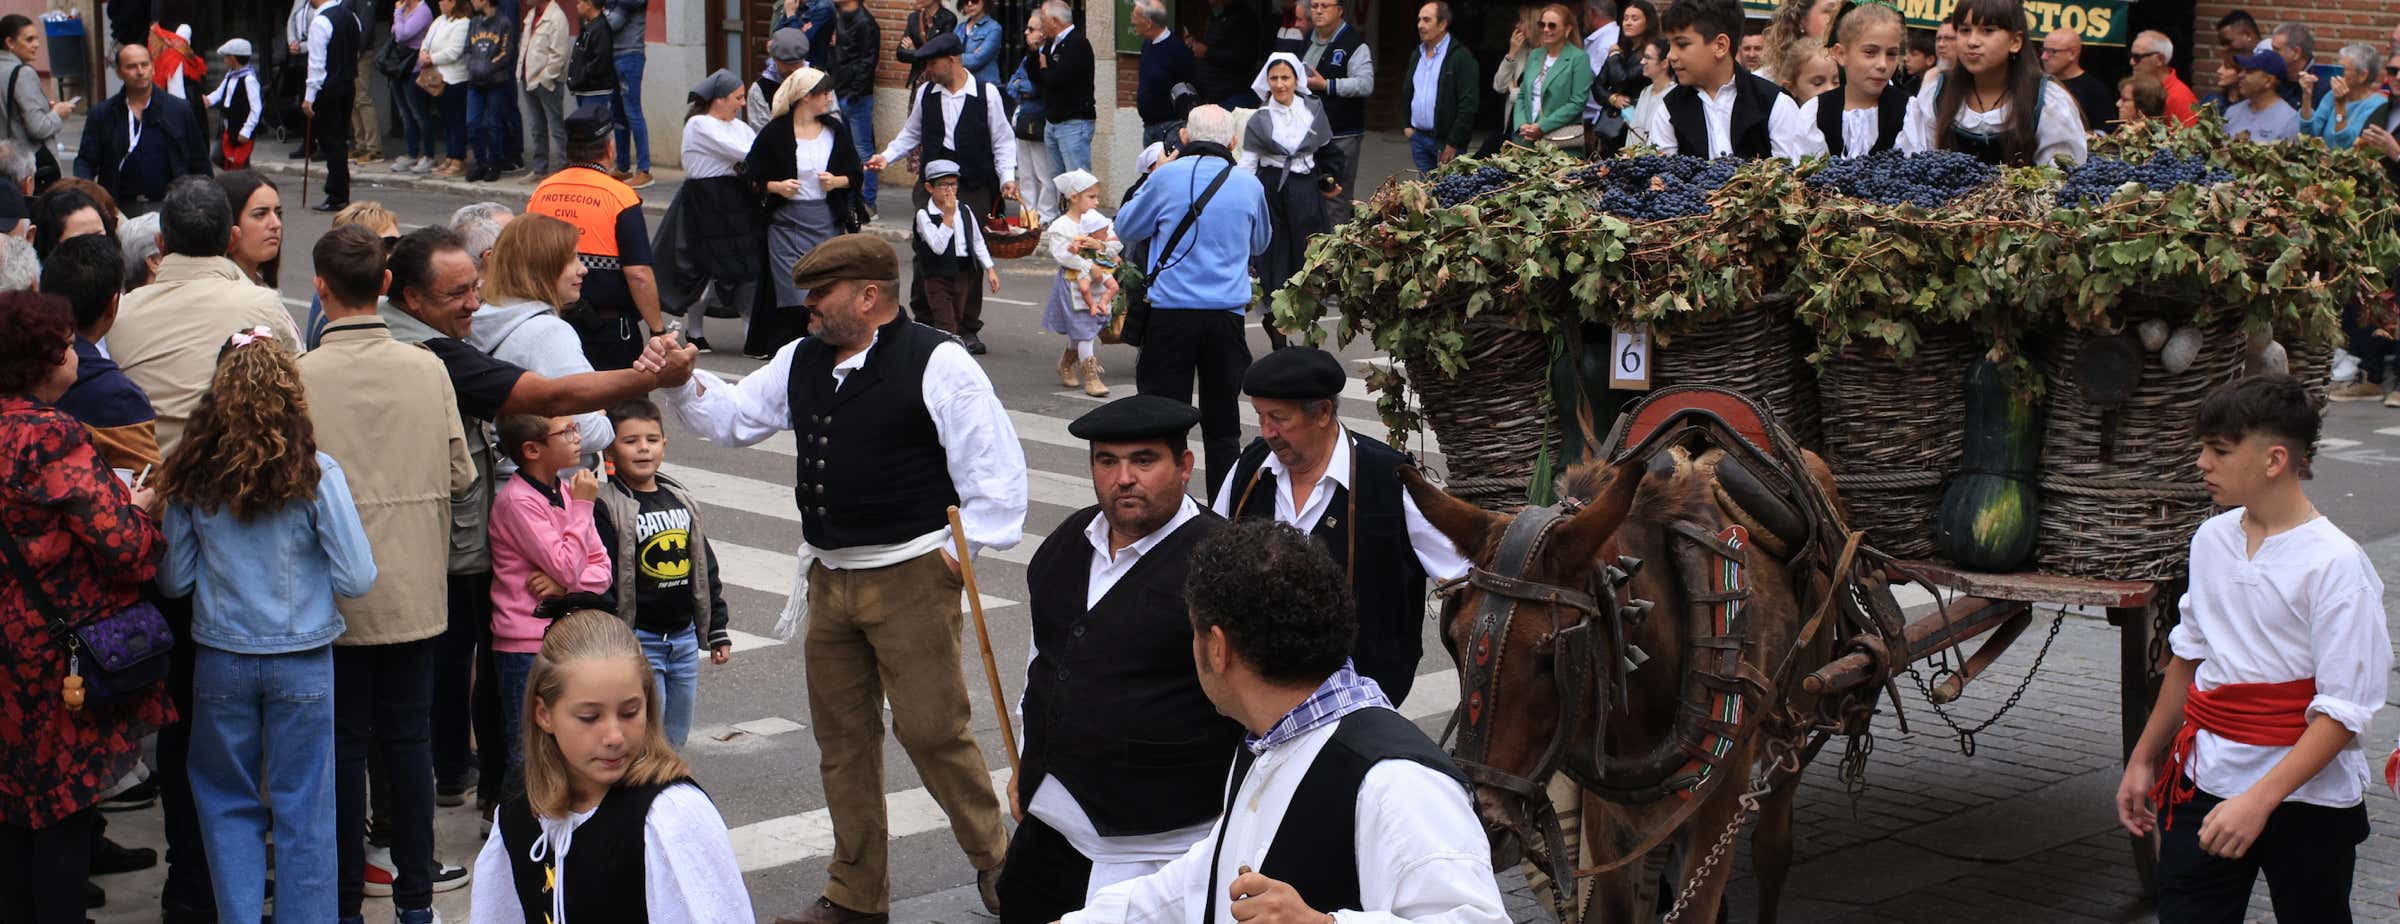 The image shows many celebrating people during the wine festival and parade in Toro. A traditional wooden cart filled with grapes and pumpkins is pulled by a donkey.